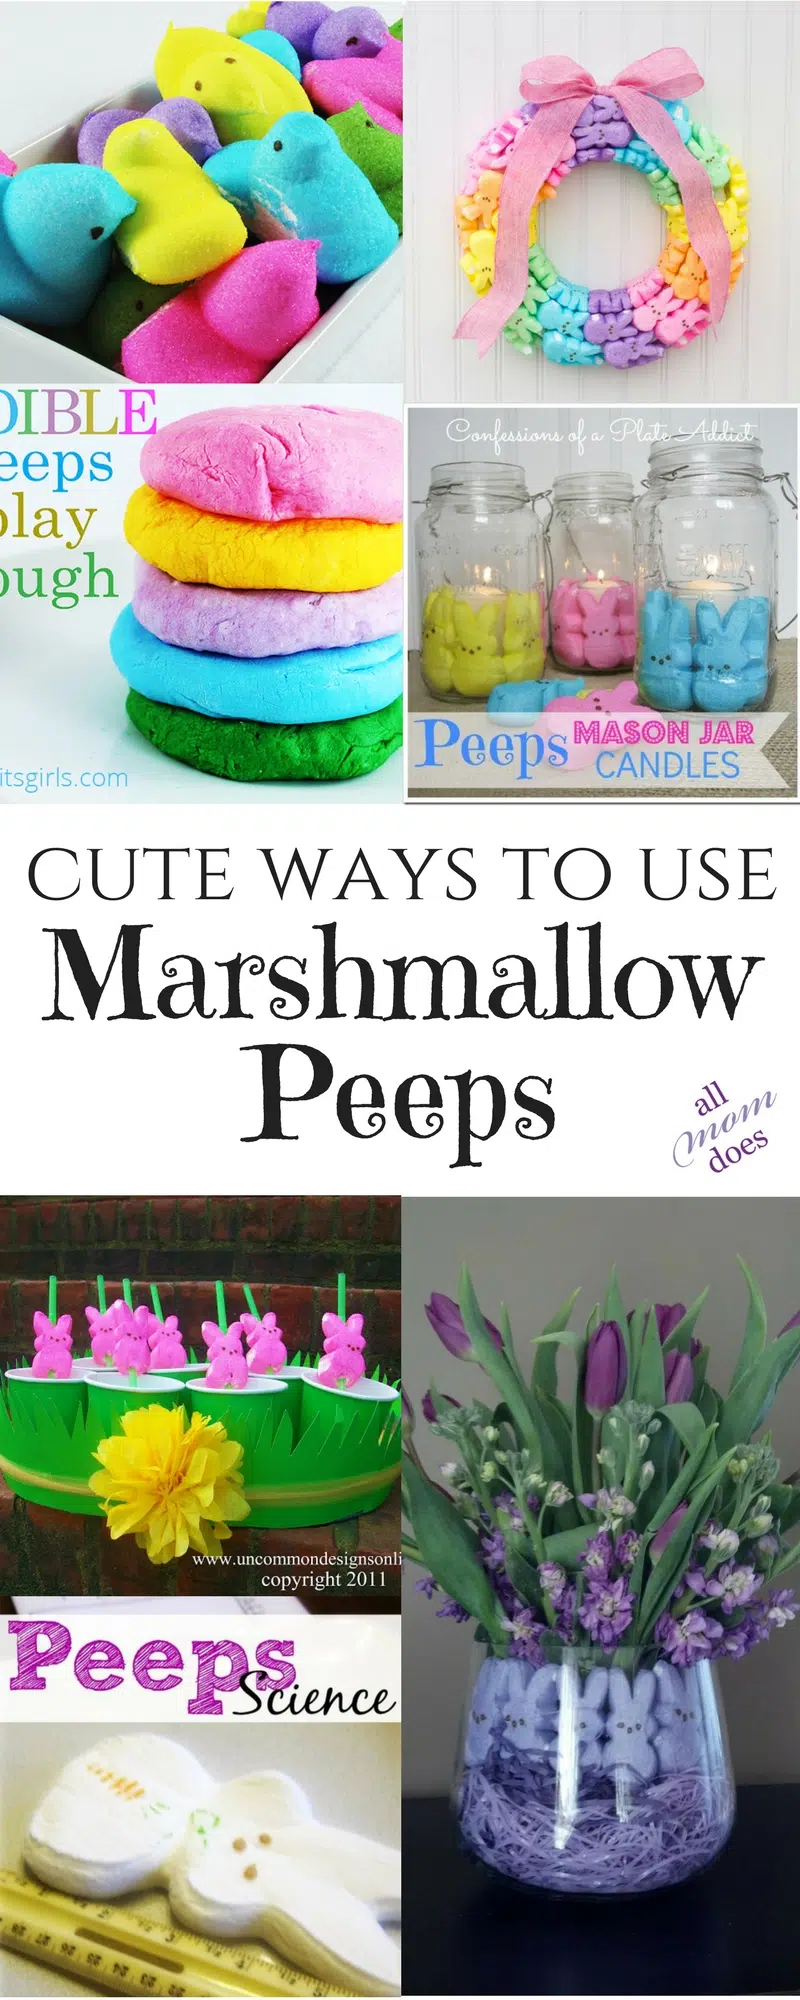 Cute ideas for marshmallow peeps. Spring and Easter craft and decor ideas!